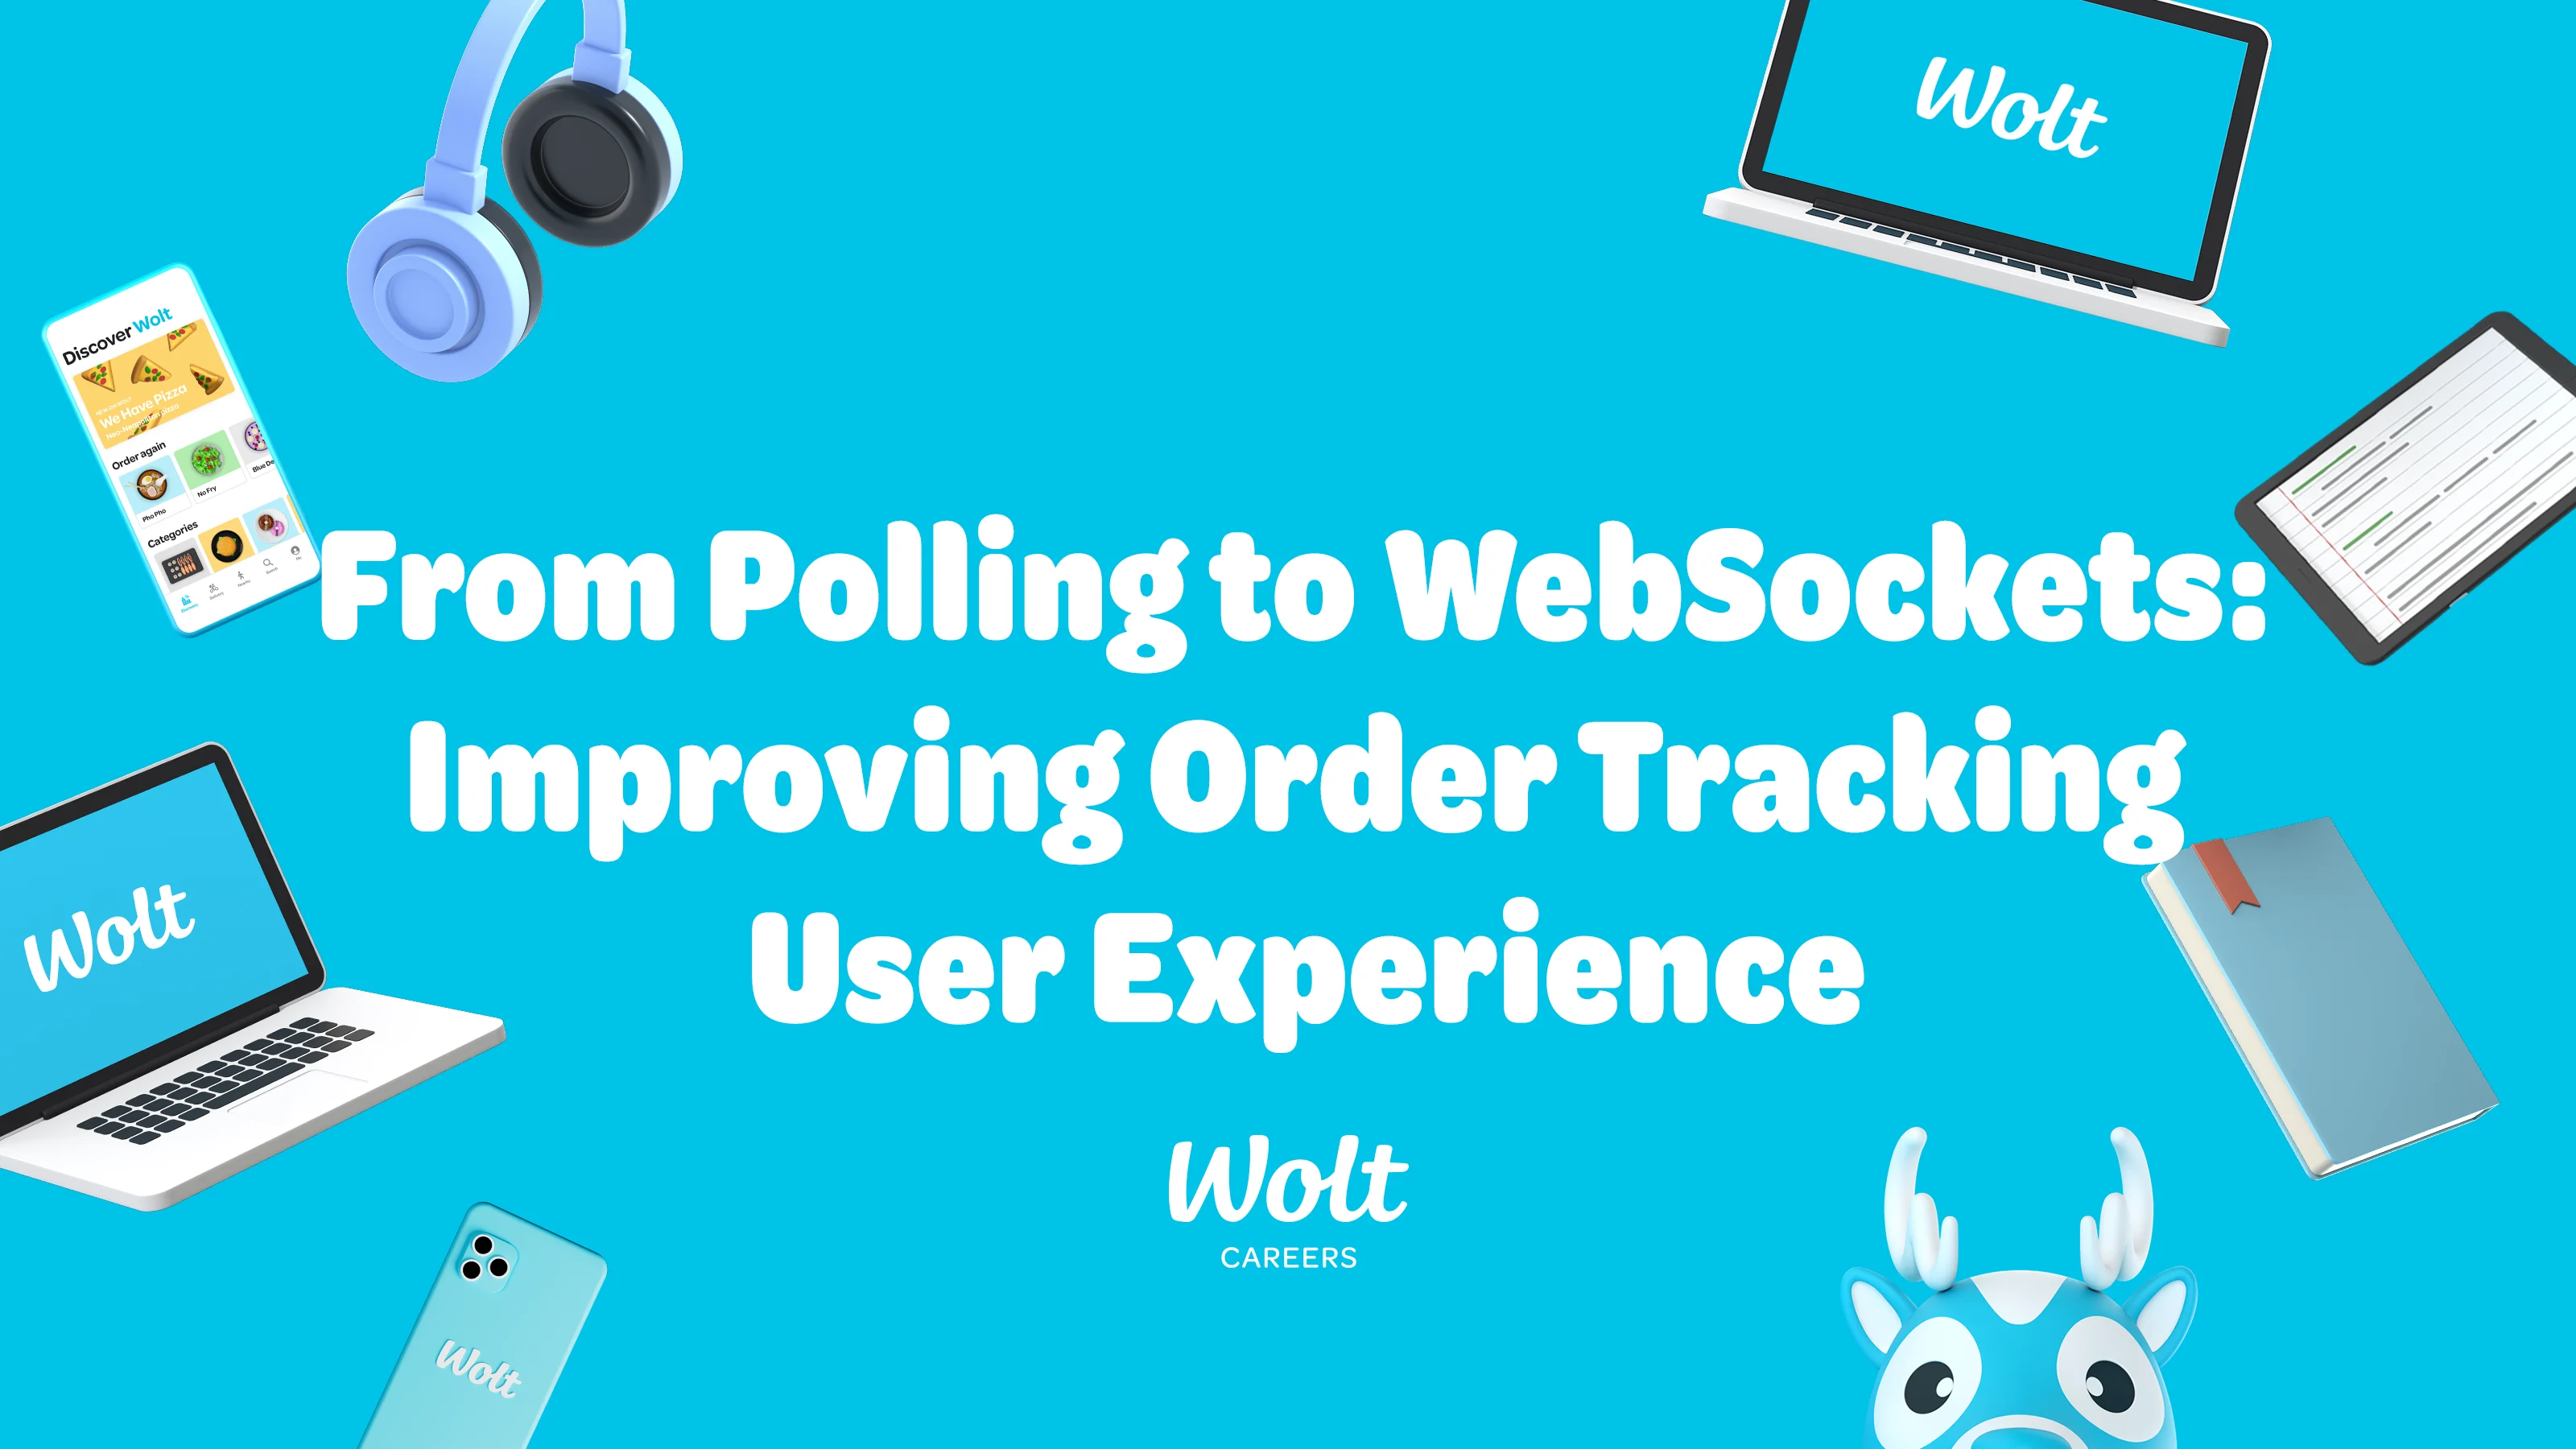 From polling to websocket (blog)